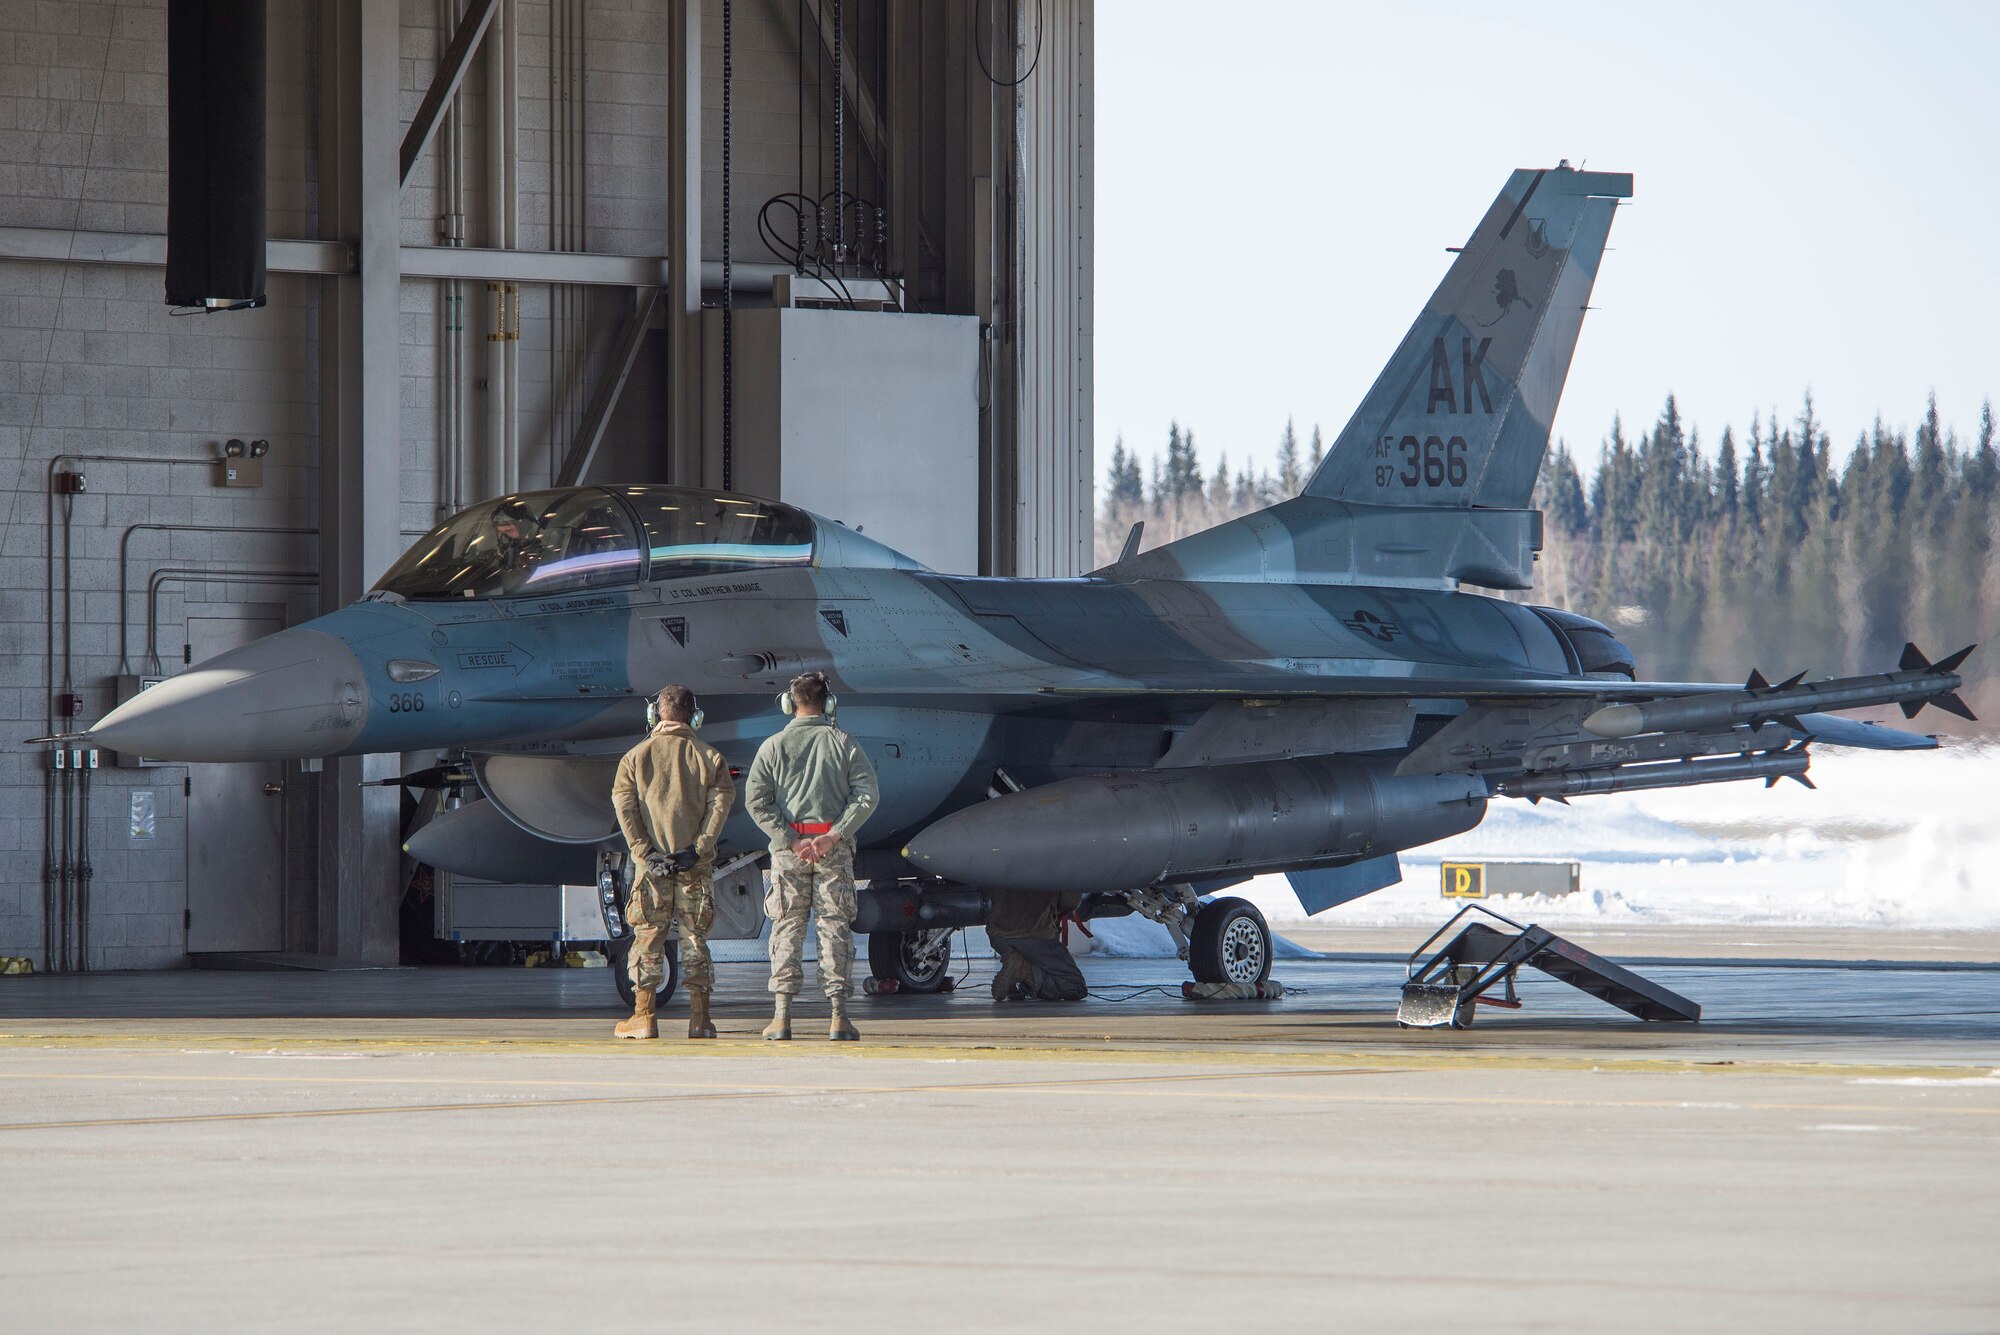 Maj. Lloyd Wright, a pilot assigned to the 18th Aggressor Squadron (AGRS), prepares for takeoff on Eielson Air Force Base, Alaska, April 9, 2020. The 18th AGRS mission is to know, teach, and replicate near-peer adversary threats in order to provide realistic training to other pilots and prepare them for combat. (U.S. Air Force photo by Staff Sgt. Zade Vadnais)